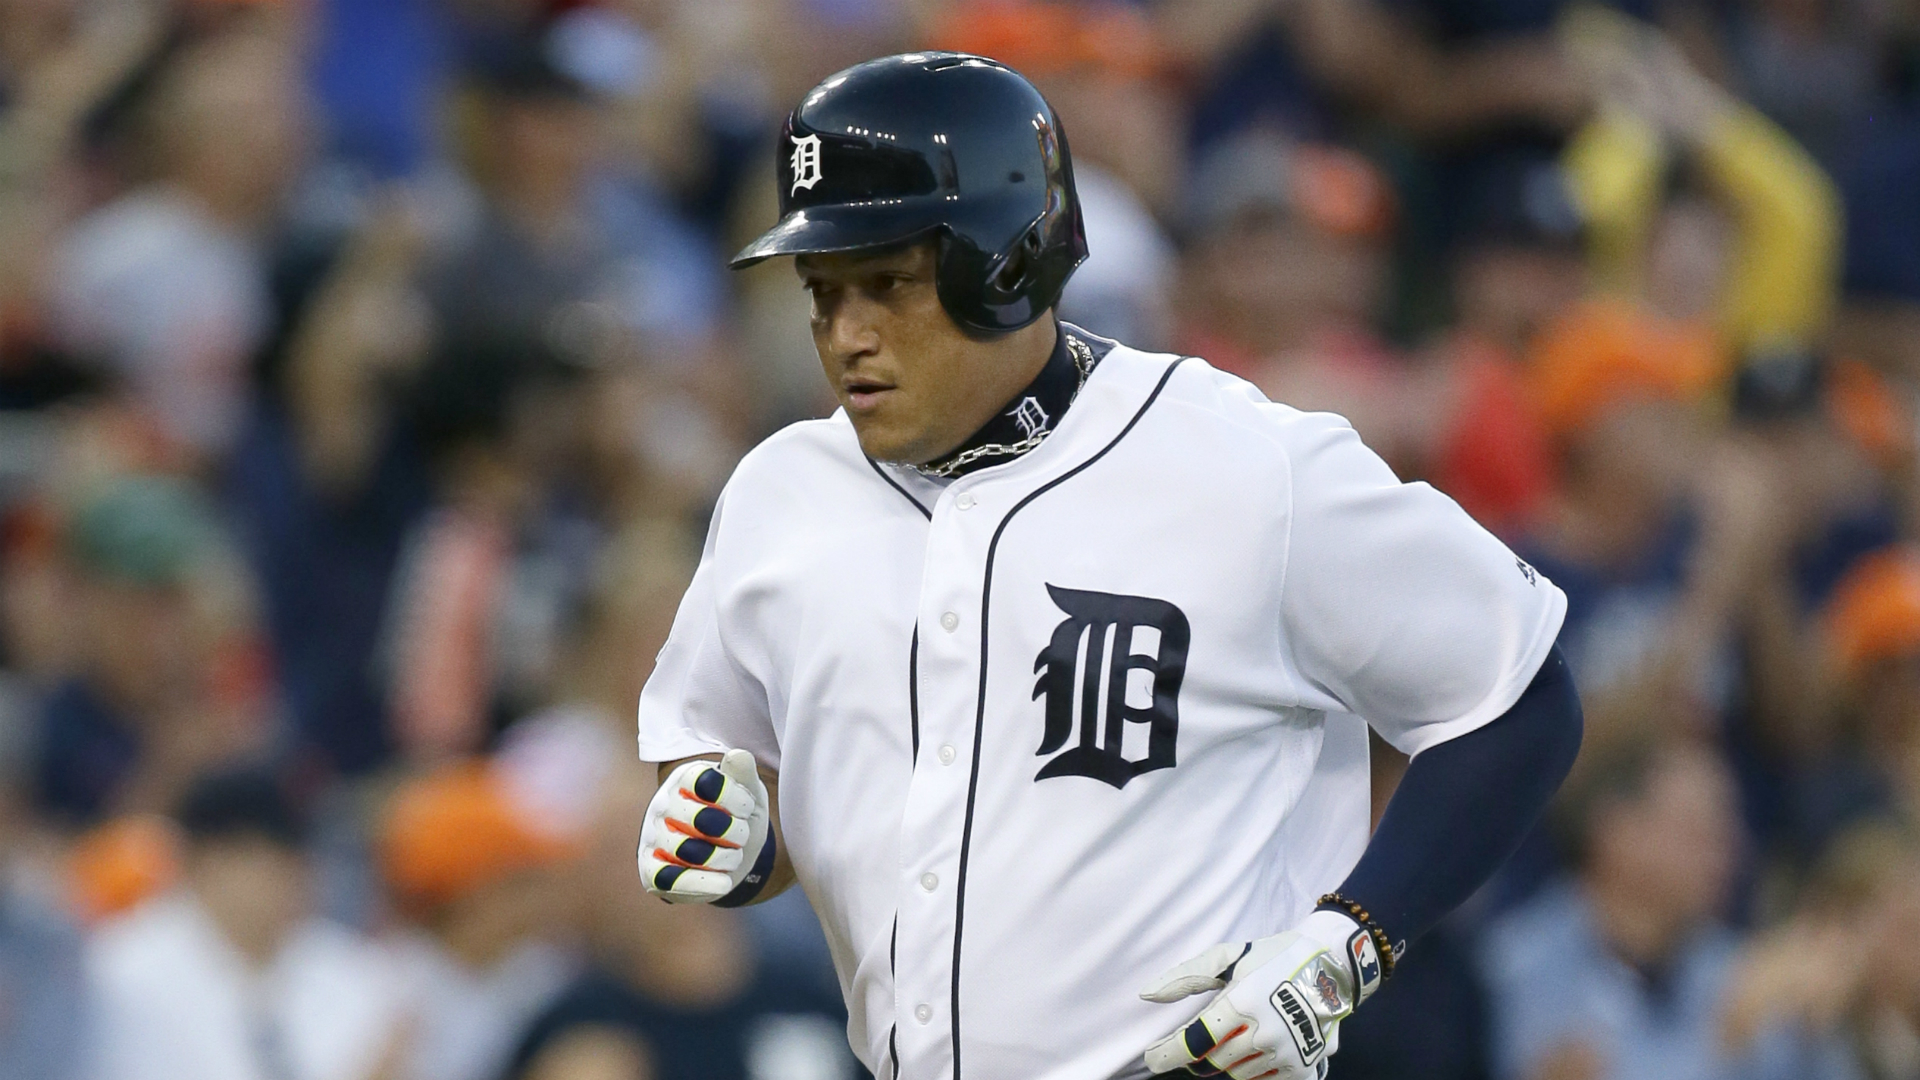 Miguel Cabrera injury update: Tigers star 'done playing hurt'; Ron Gardenhire OK with that

Translate this text to English. Provide the output without any additional text: Miguel Cabrera informe de lesiones: Estrella de los Tigres 'termina de jugar lesionado'; Ron Gardenhire está de acuerdo con eso